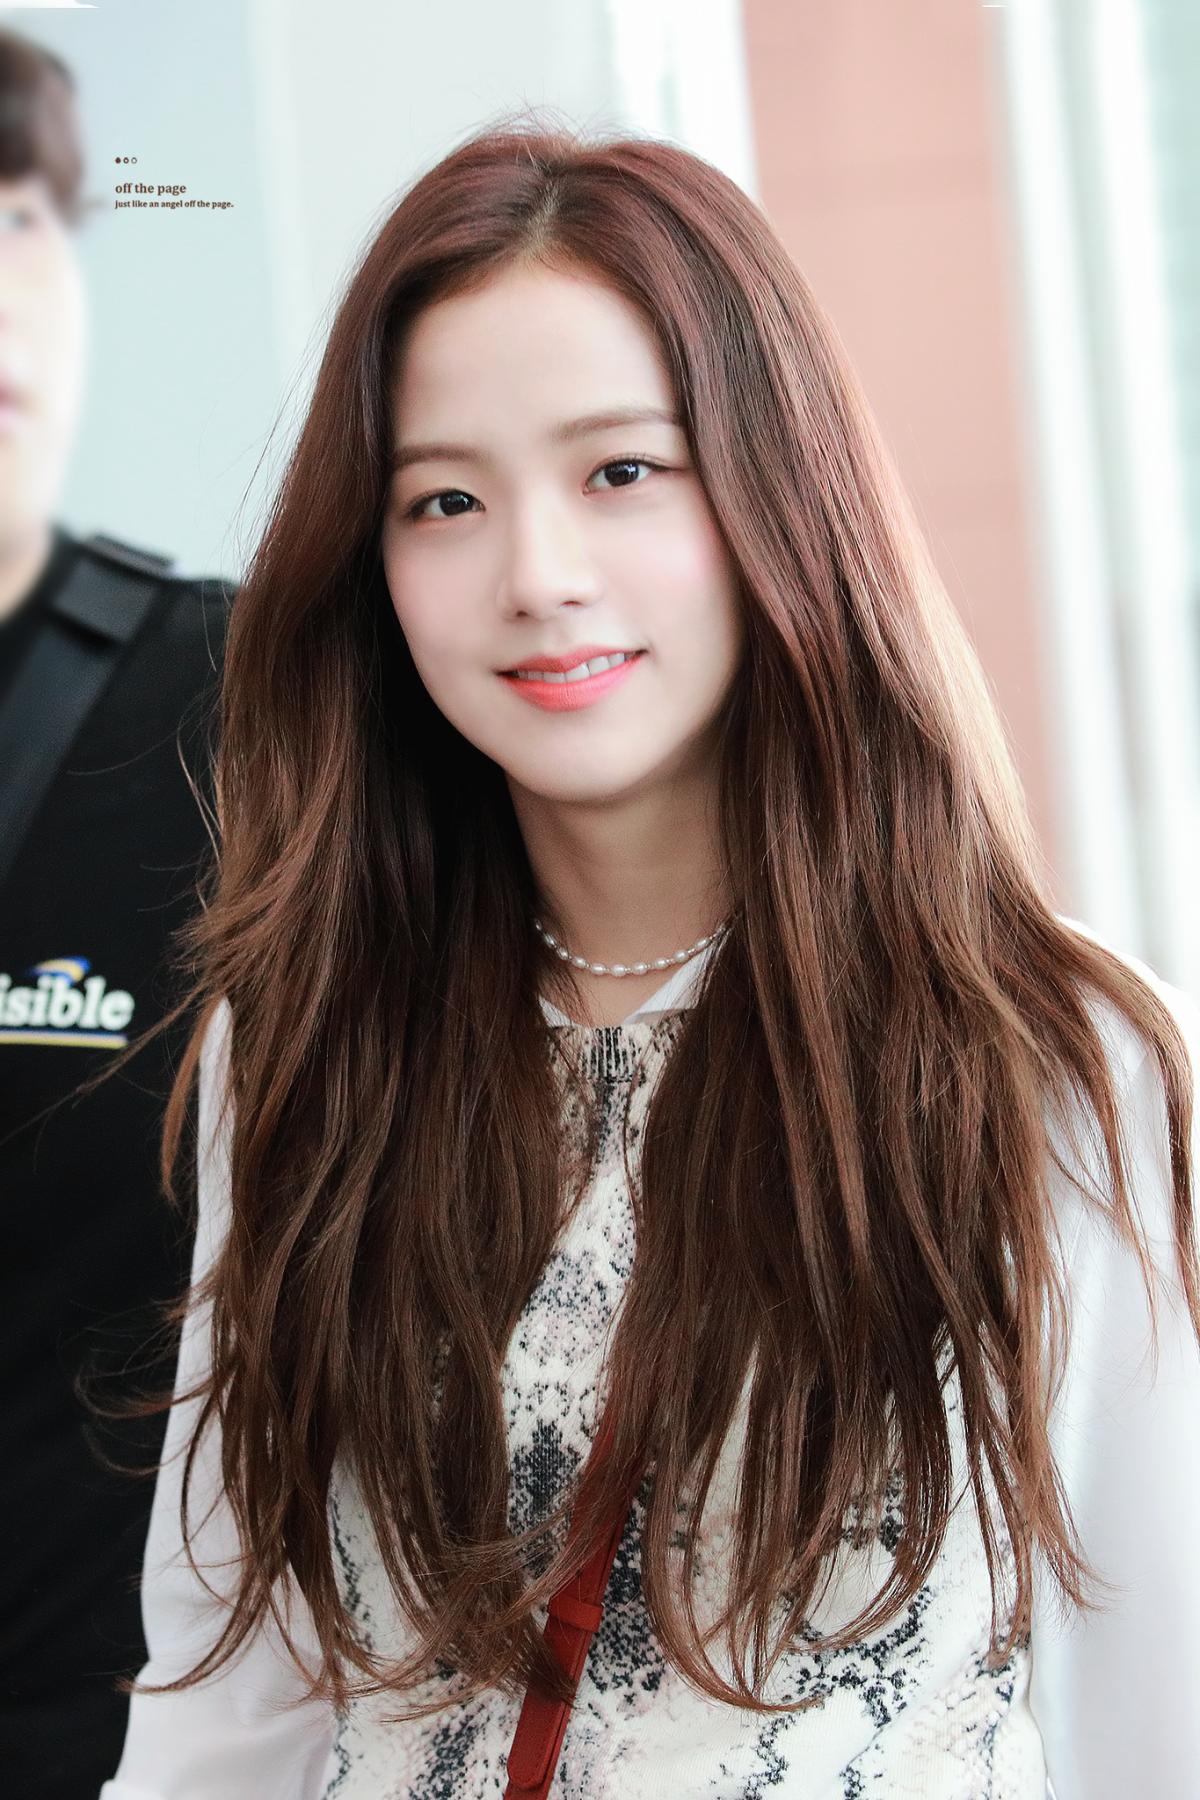 Jisoo - Celebrity biography, zodiac sign and famous quotes